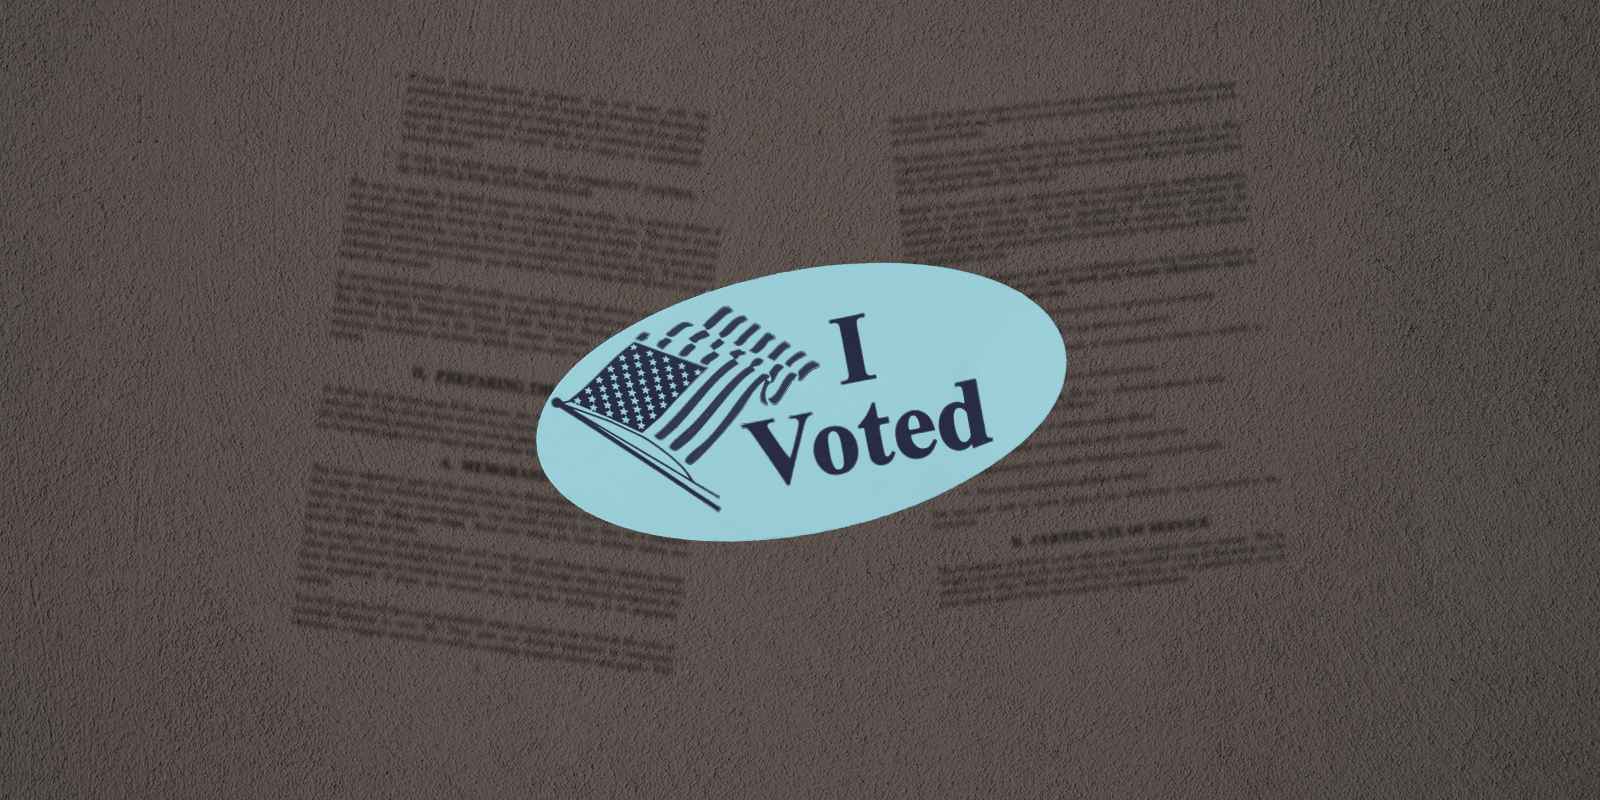 An 'I Voted' sticker on a textured grey background